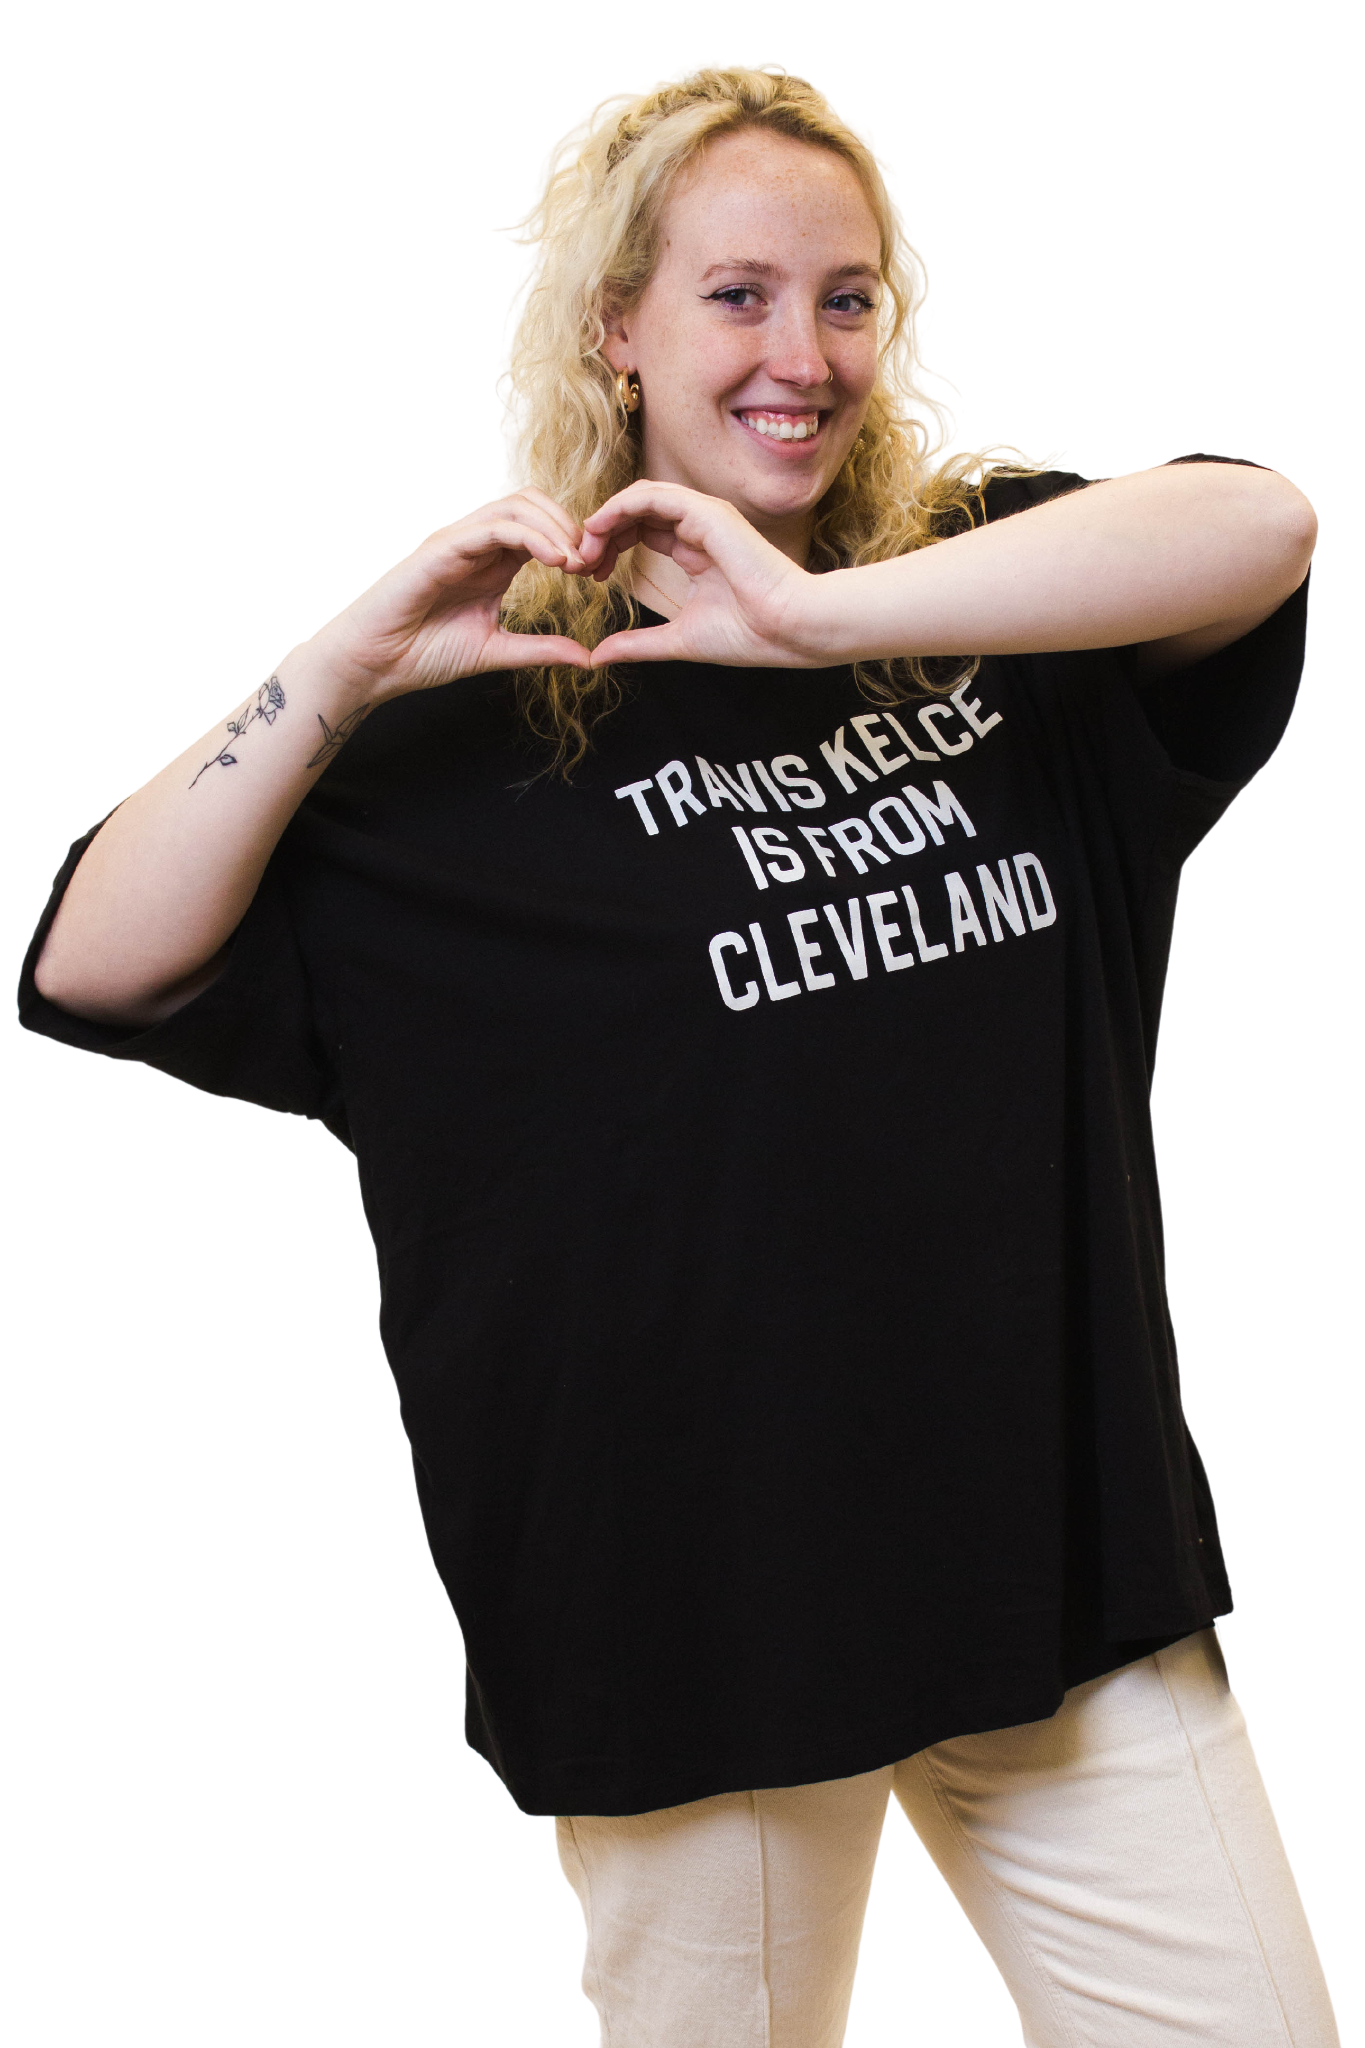 Travis Kelce Is From Cleveland Oversized Sleep Shirt